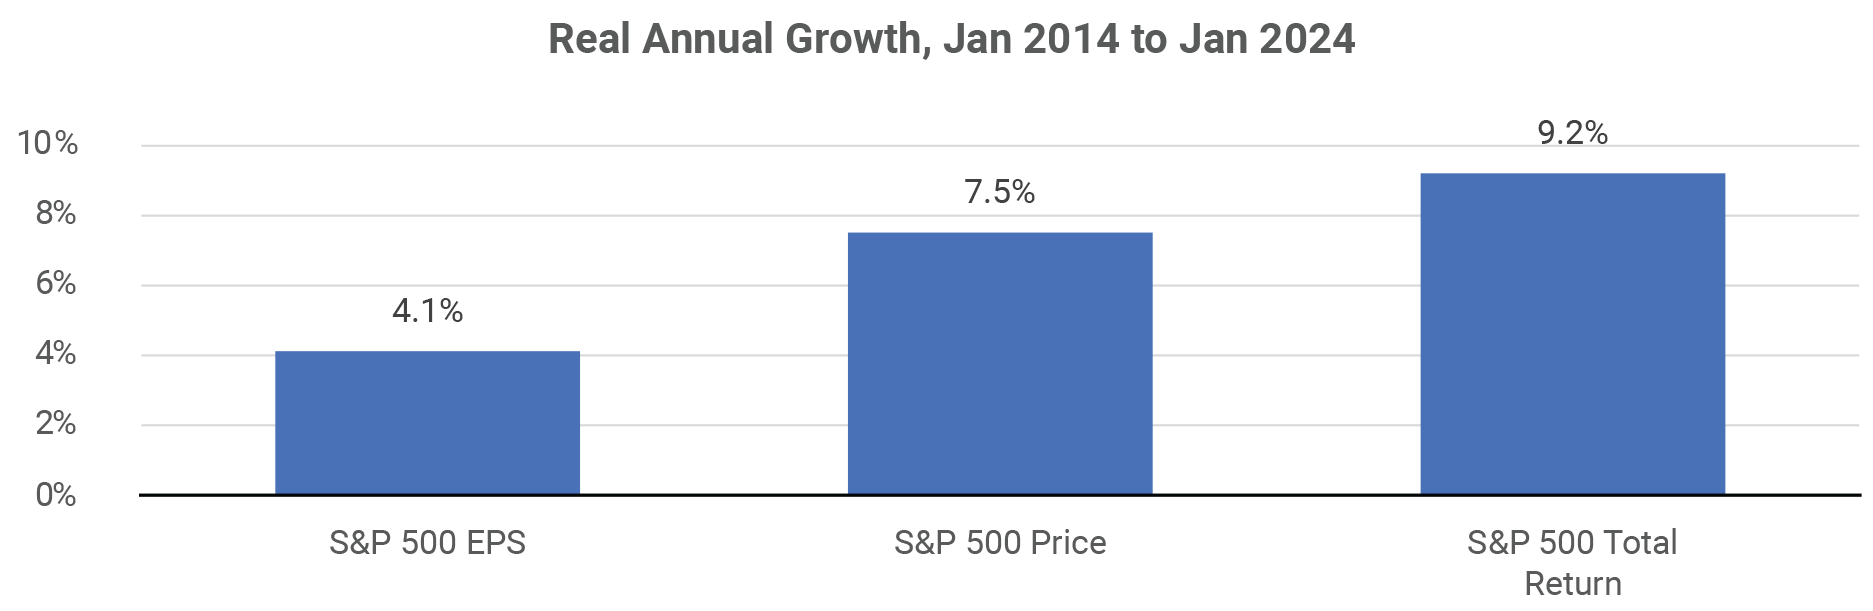 Real Annual Growth, Jan 2014 to Jan 2024